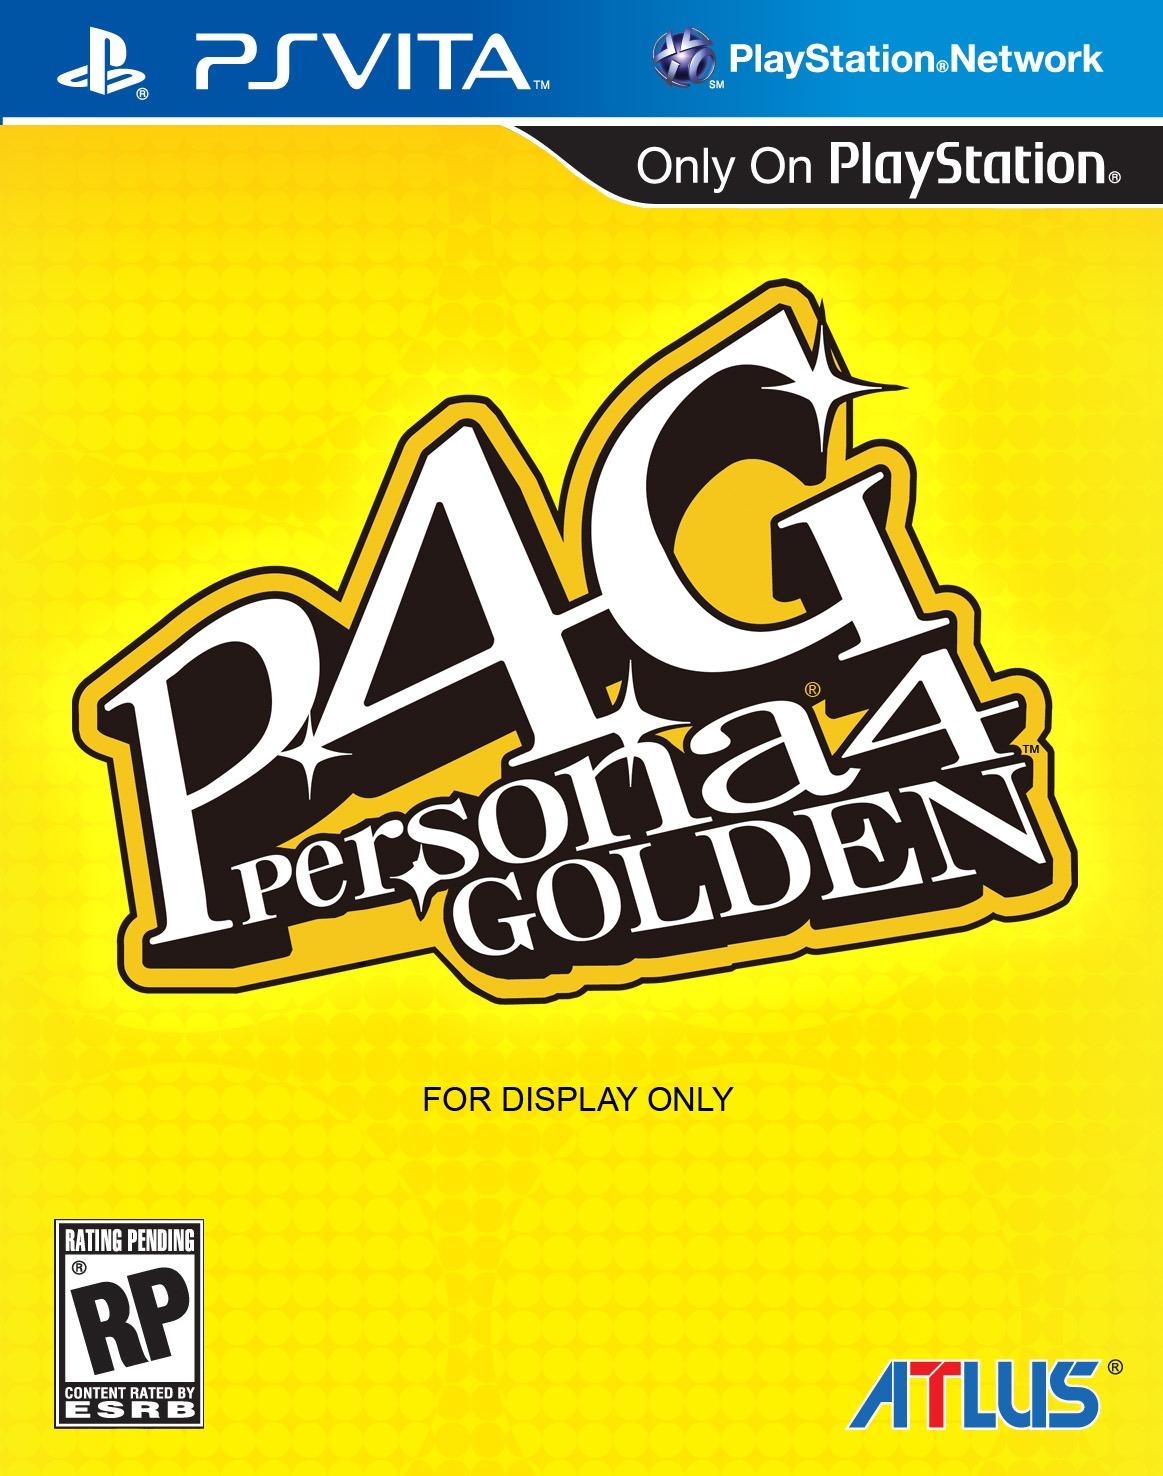 Persona 4: Golden to land on North American Vitas in the Fall